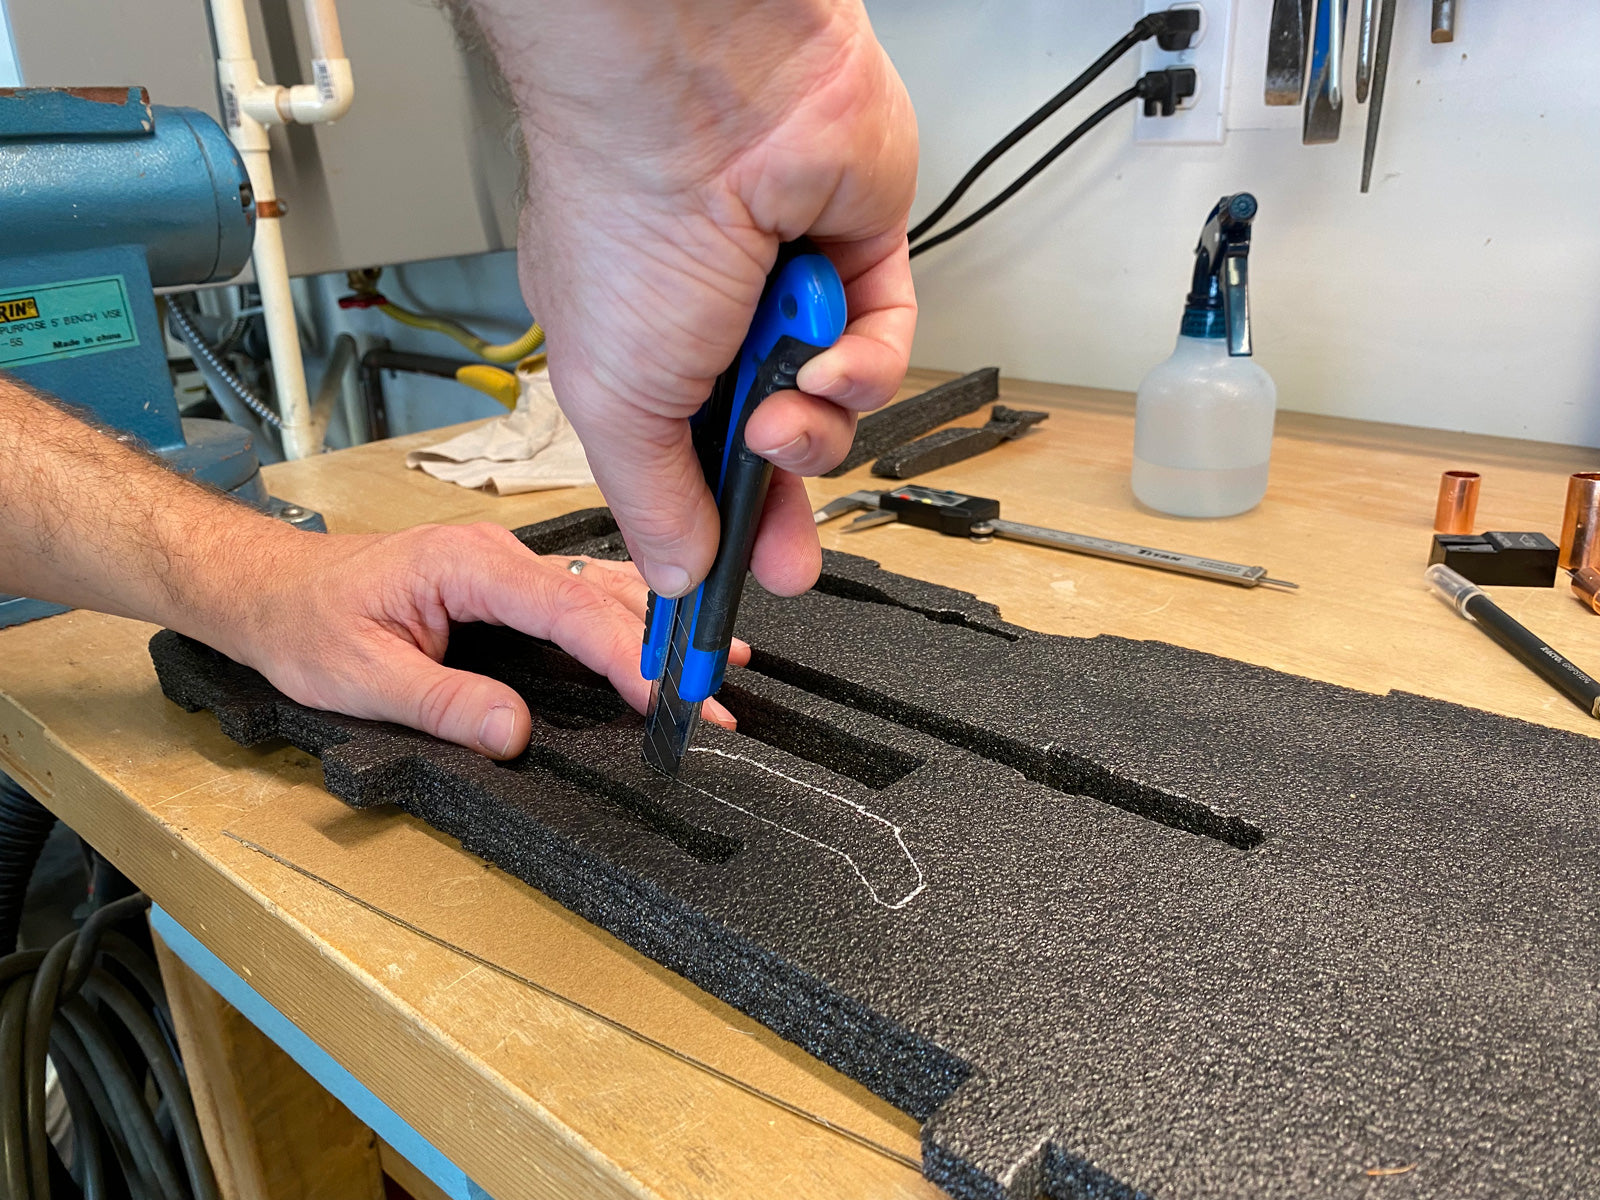 Cutting shape of tool in Kaizen foam with utility knife